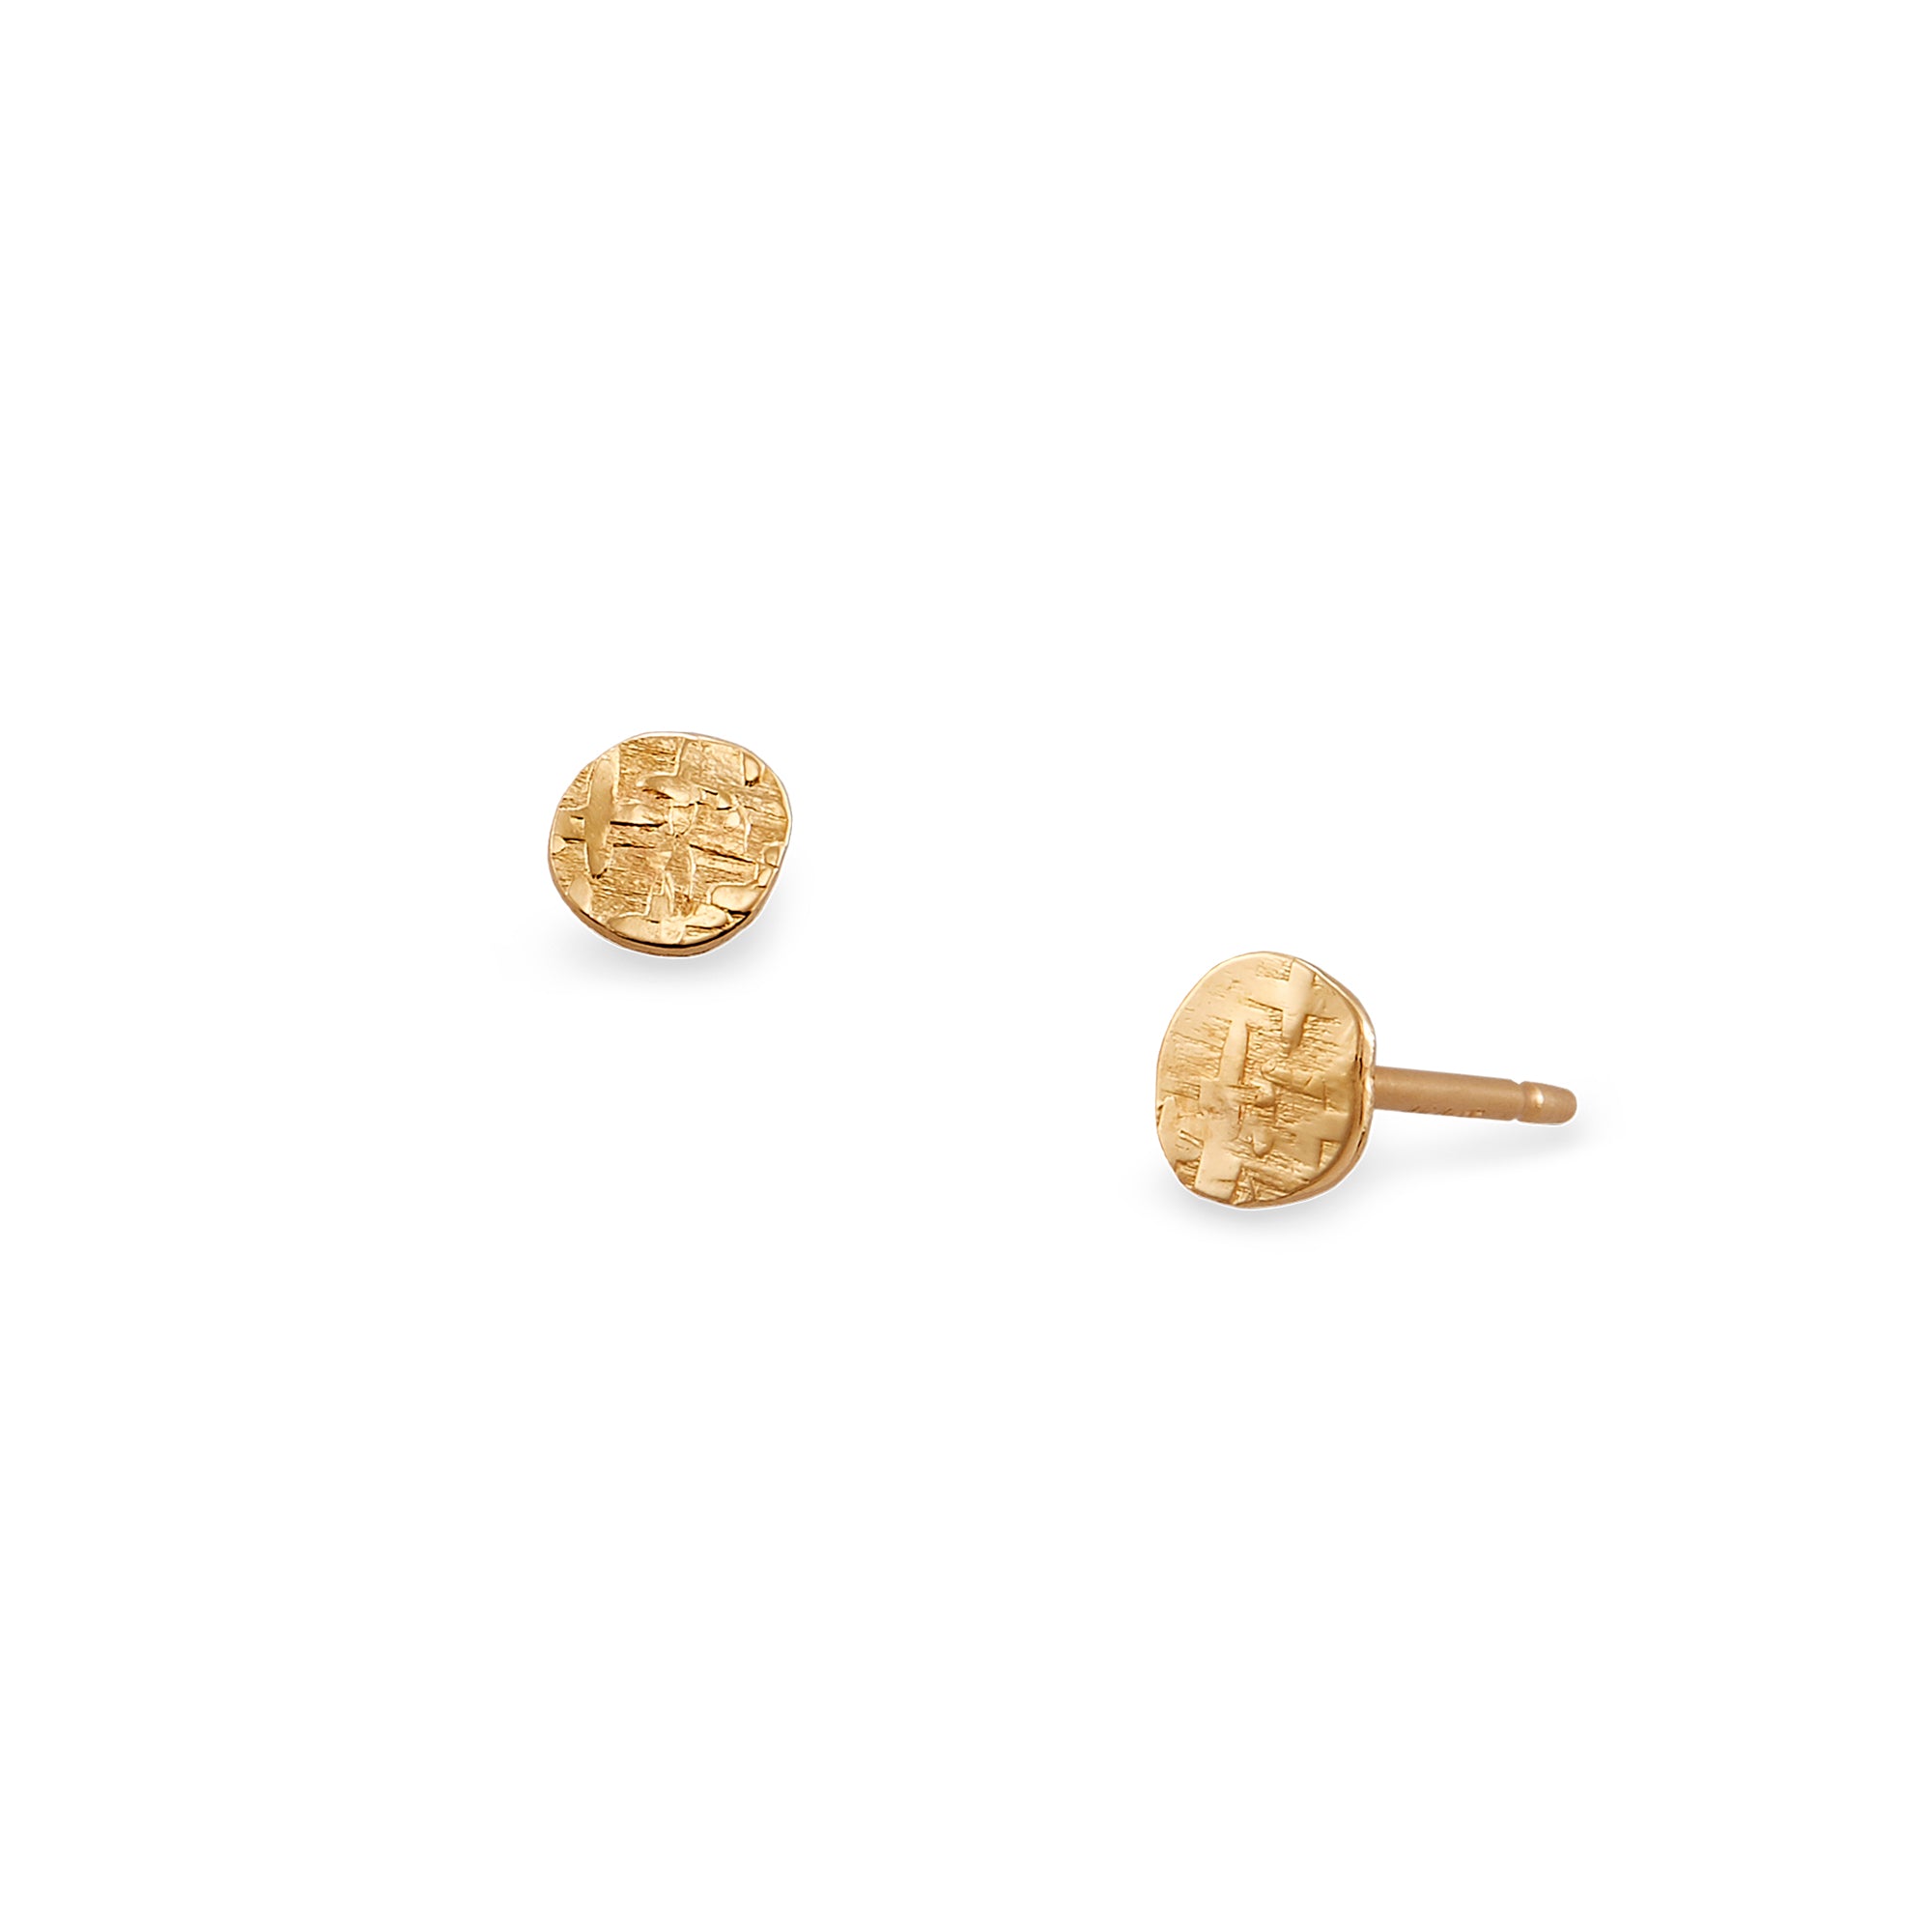 The Dot Stud, modern simplicity in 14k gold with your choice of classic hammered textured or nugget texture